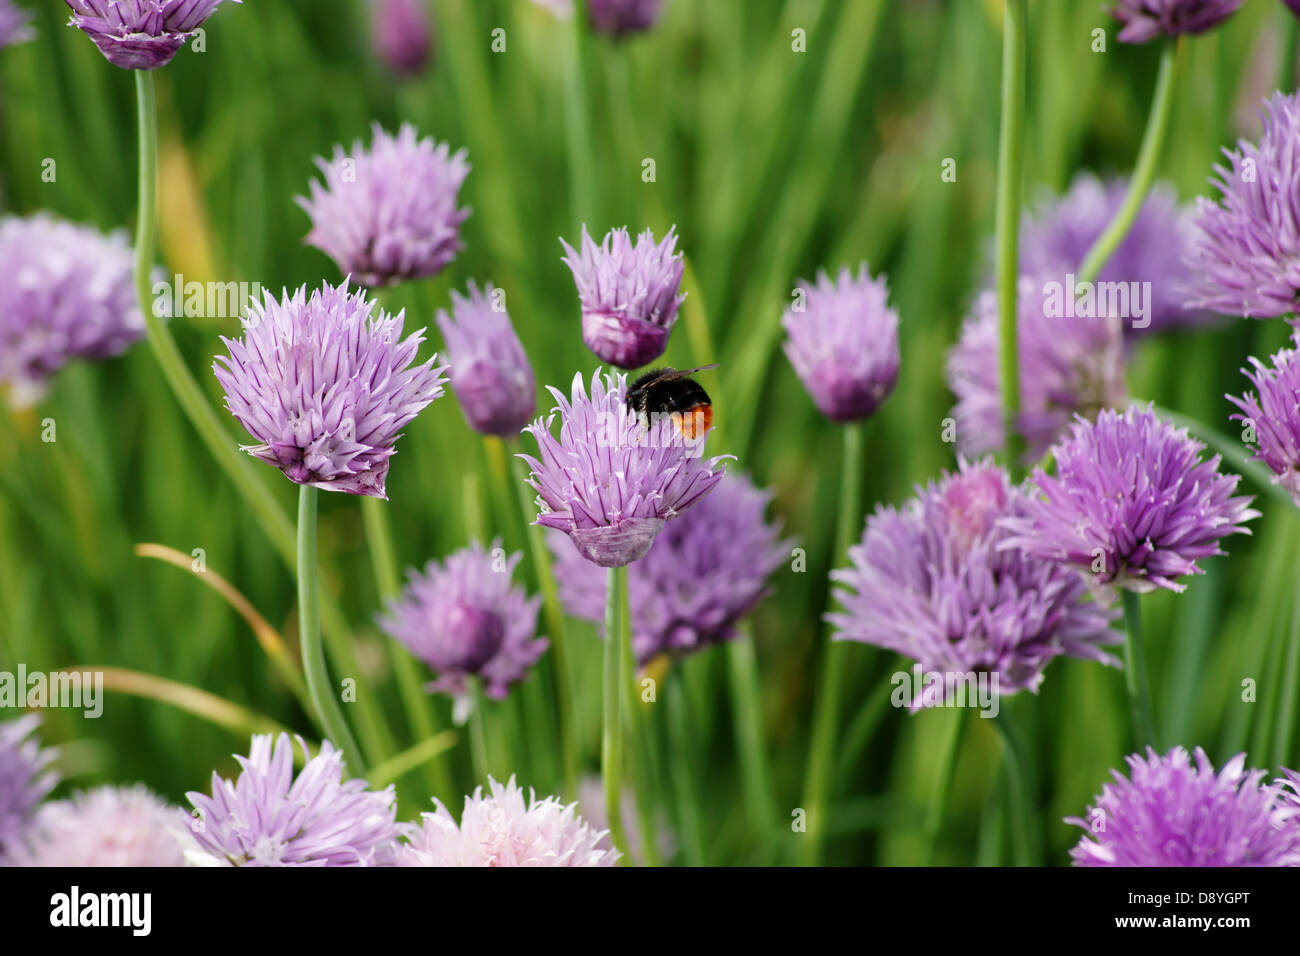 Hummel and chives Stock Photo